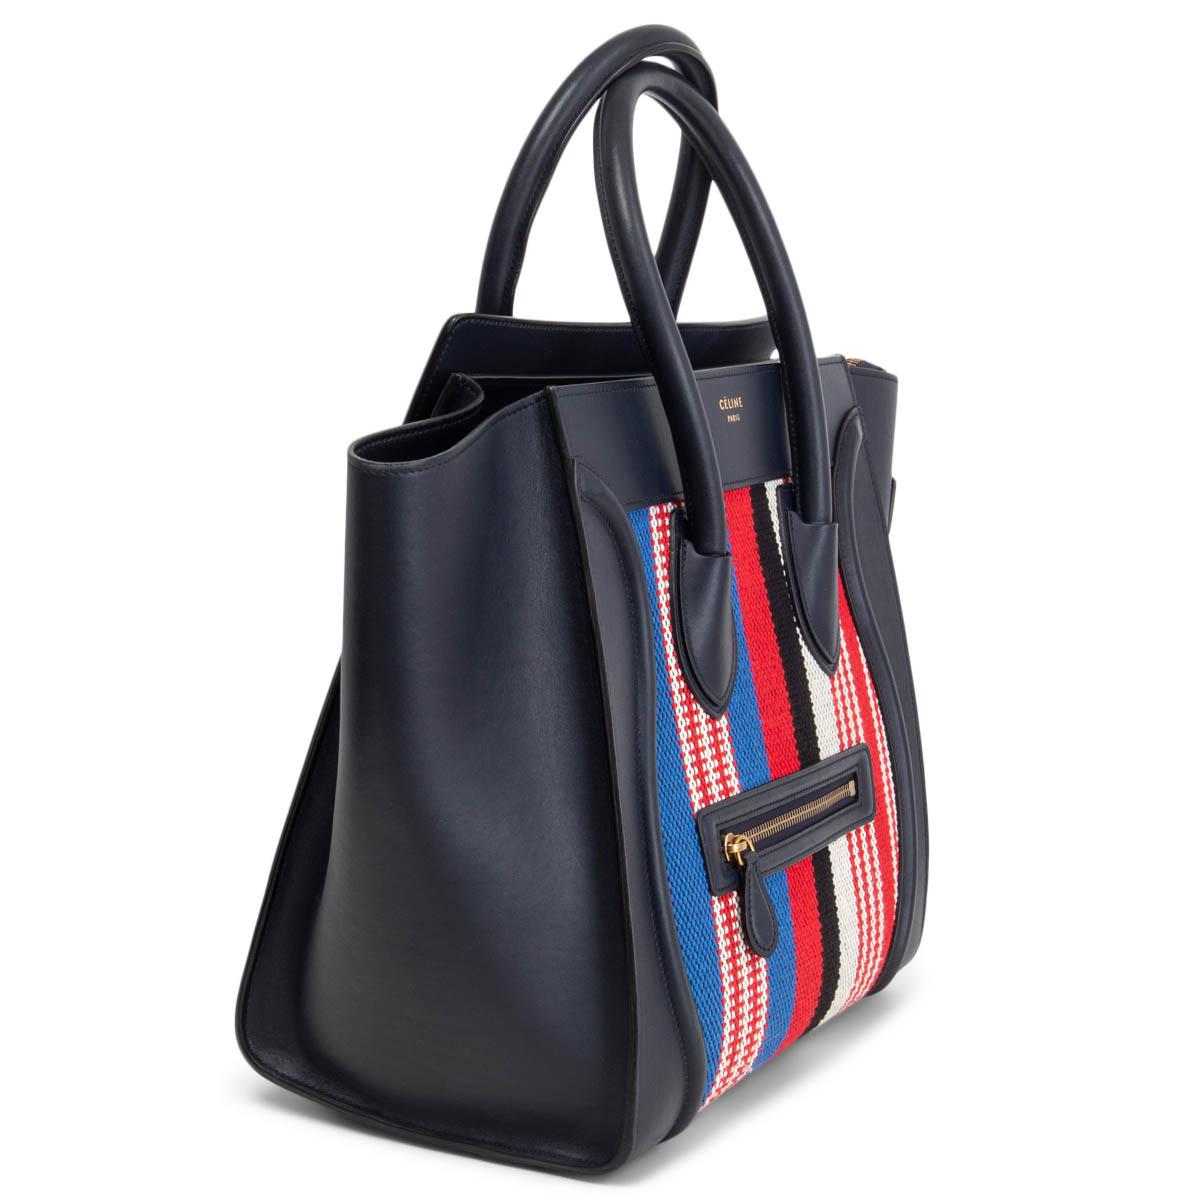 100% authentic Céline Mini Luggage in midnight blue calfskin and red, white, black and blue canvas front and back. Resort 2016 collection. Zipper pocket on the front. Opens with a zipper on top and is lined in midnight blue leather with two open